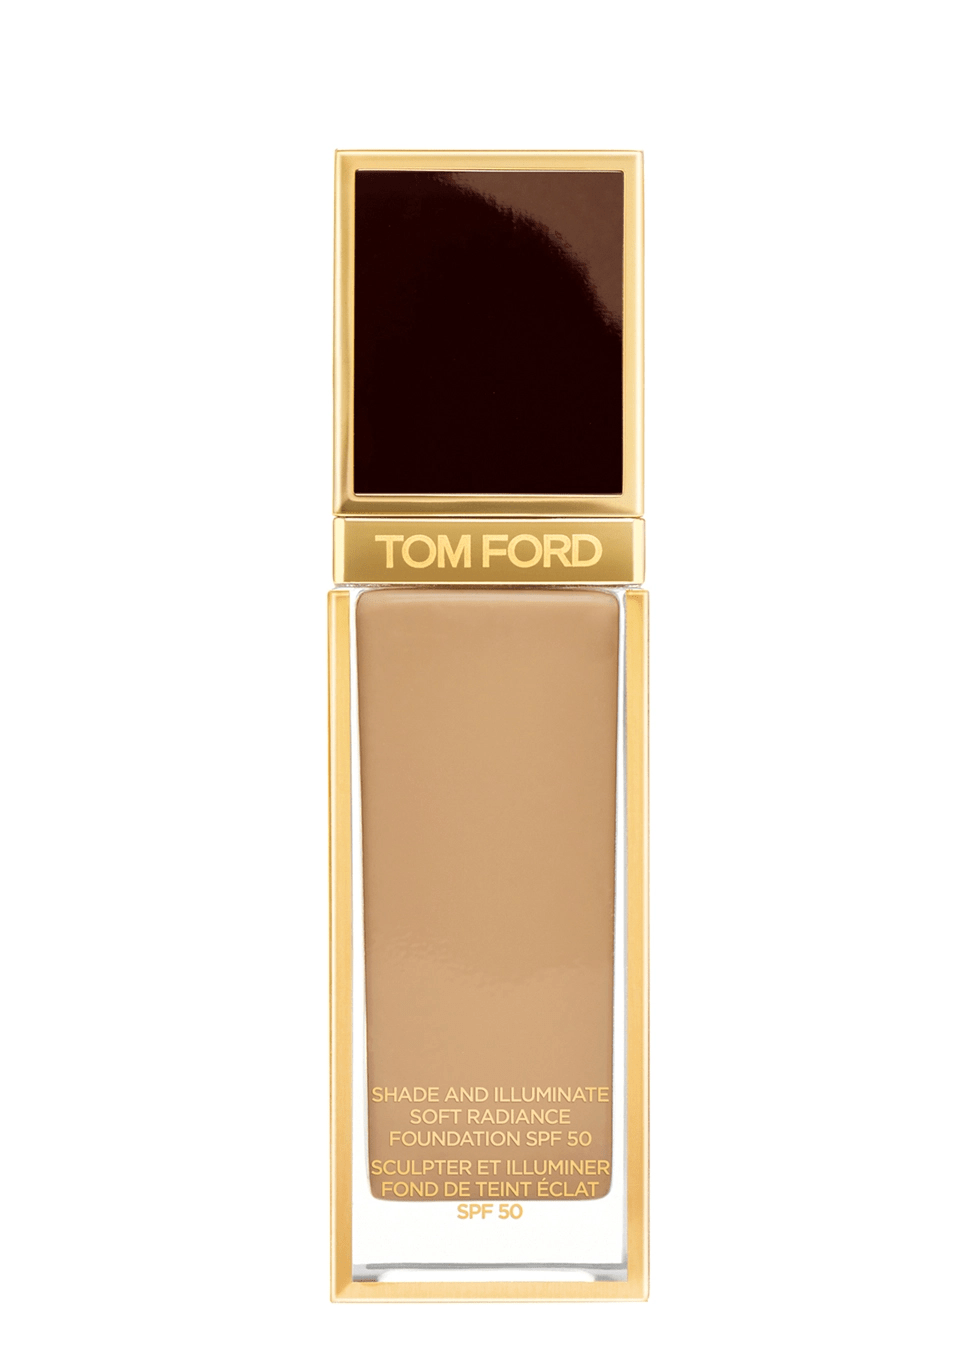 Tom Ford Shade and Illuminate Soft Radiance Foundation SPF 50 - 8.7 Golden Almond, foundation, London Loves Beauty